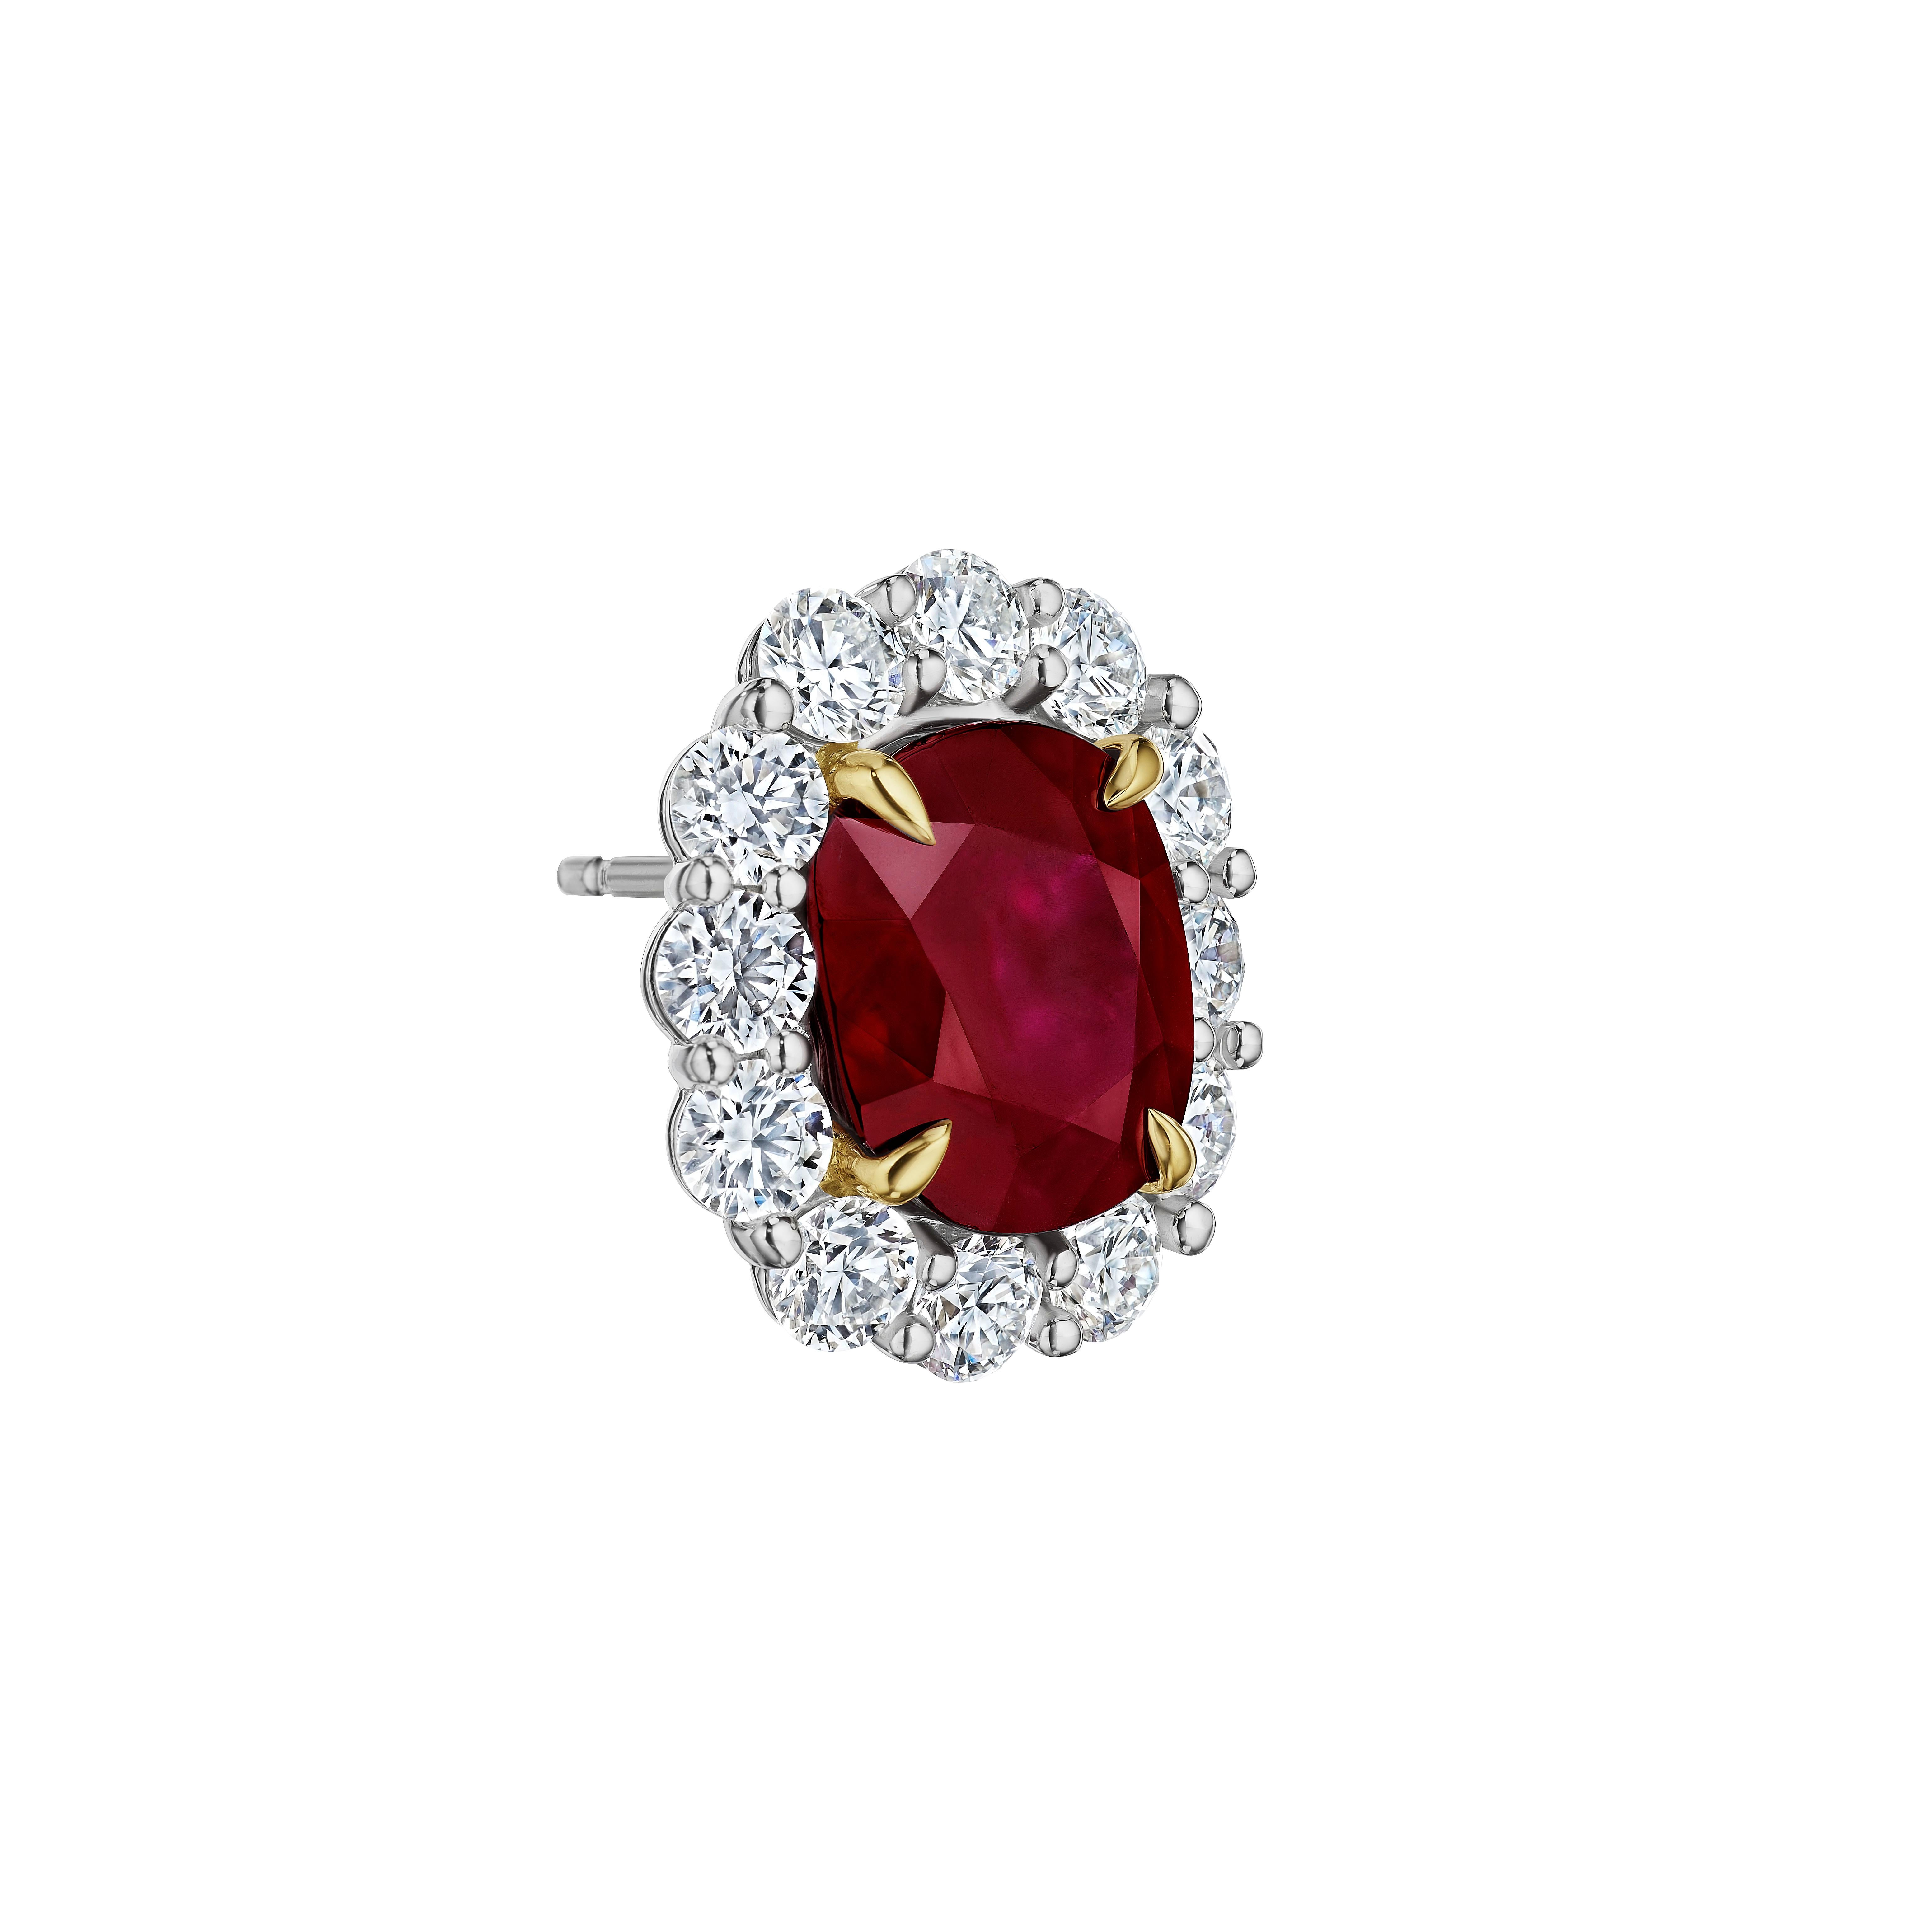 Cushion Cut 13.34ct GRS Certified Ruby & Diamond Earrings in Platinum & 18KT Gold For Sale